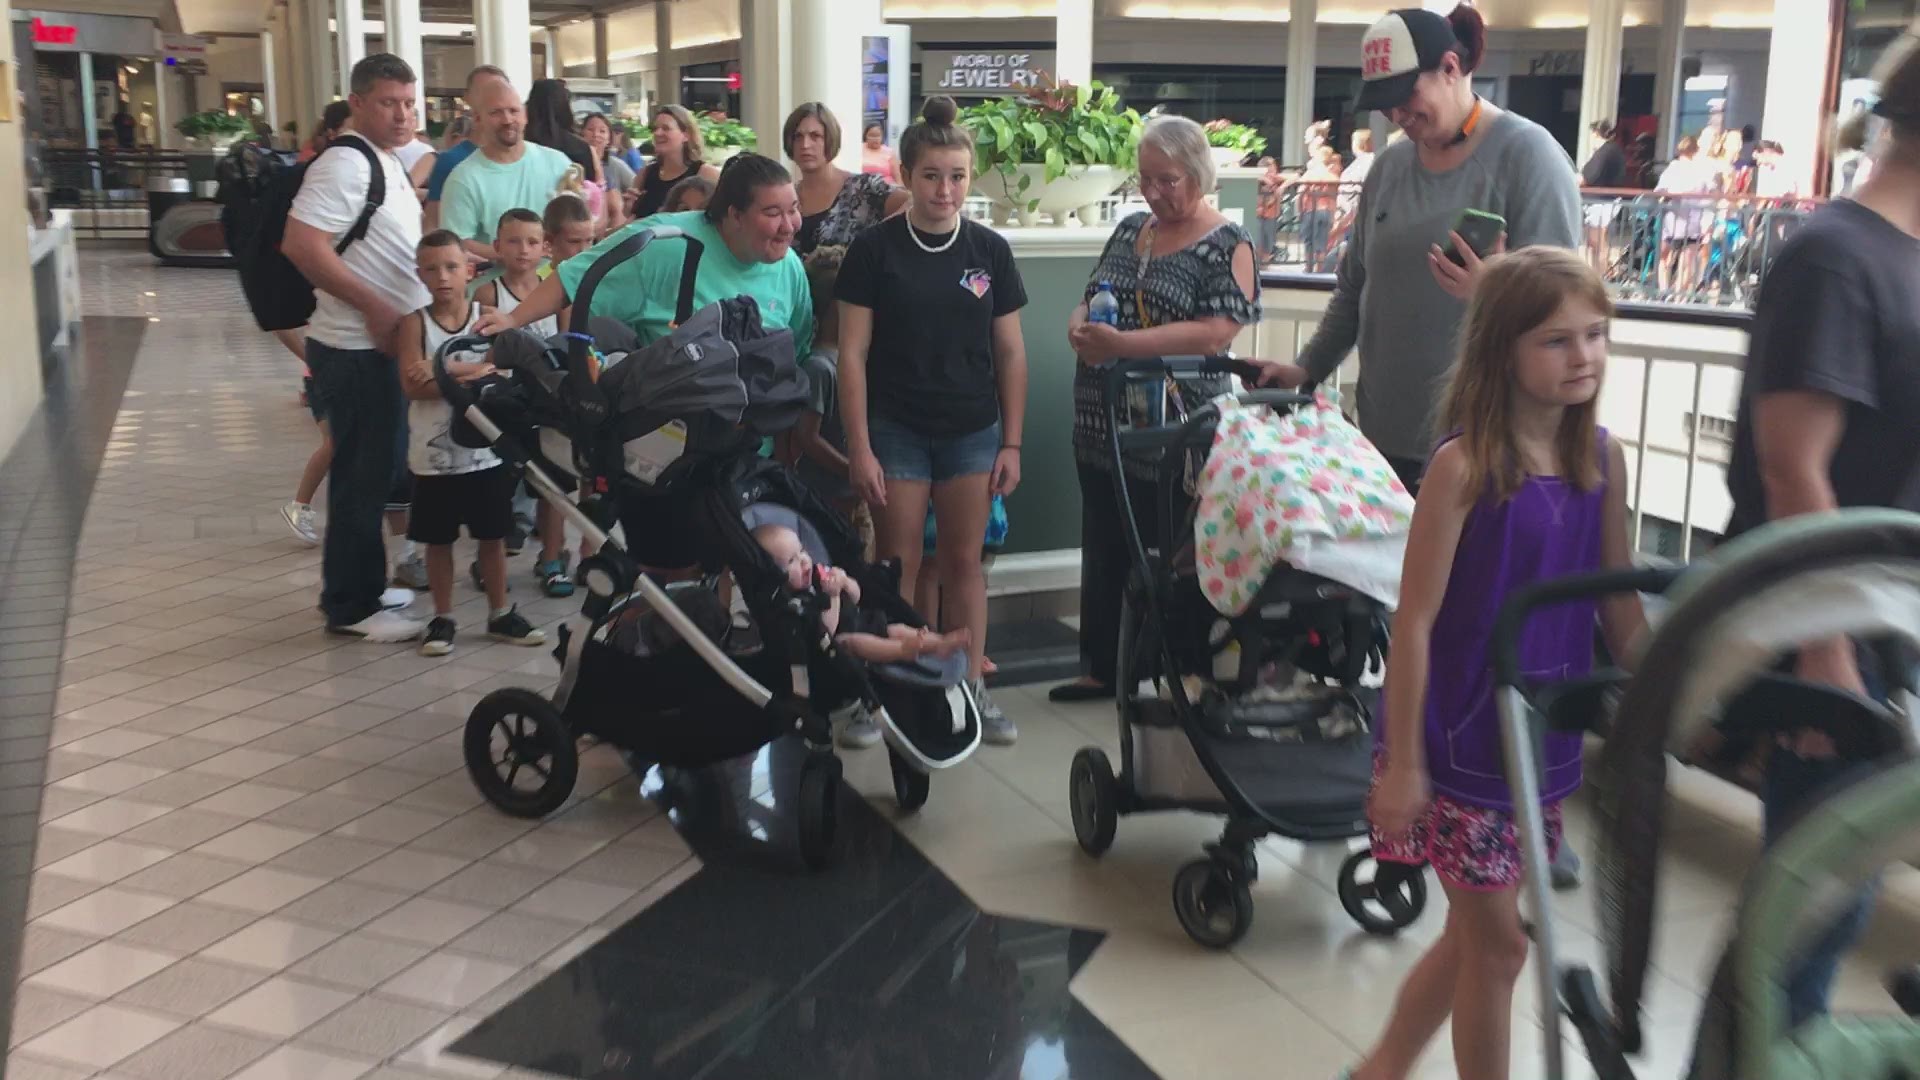 Hundreds of people lined up early for Build-A-Bear Workshop's "Pay Your Age Day"